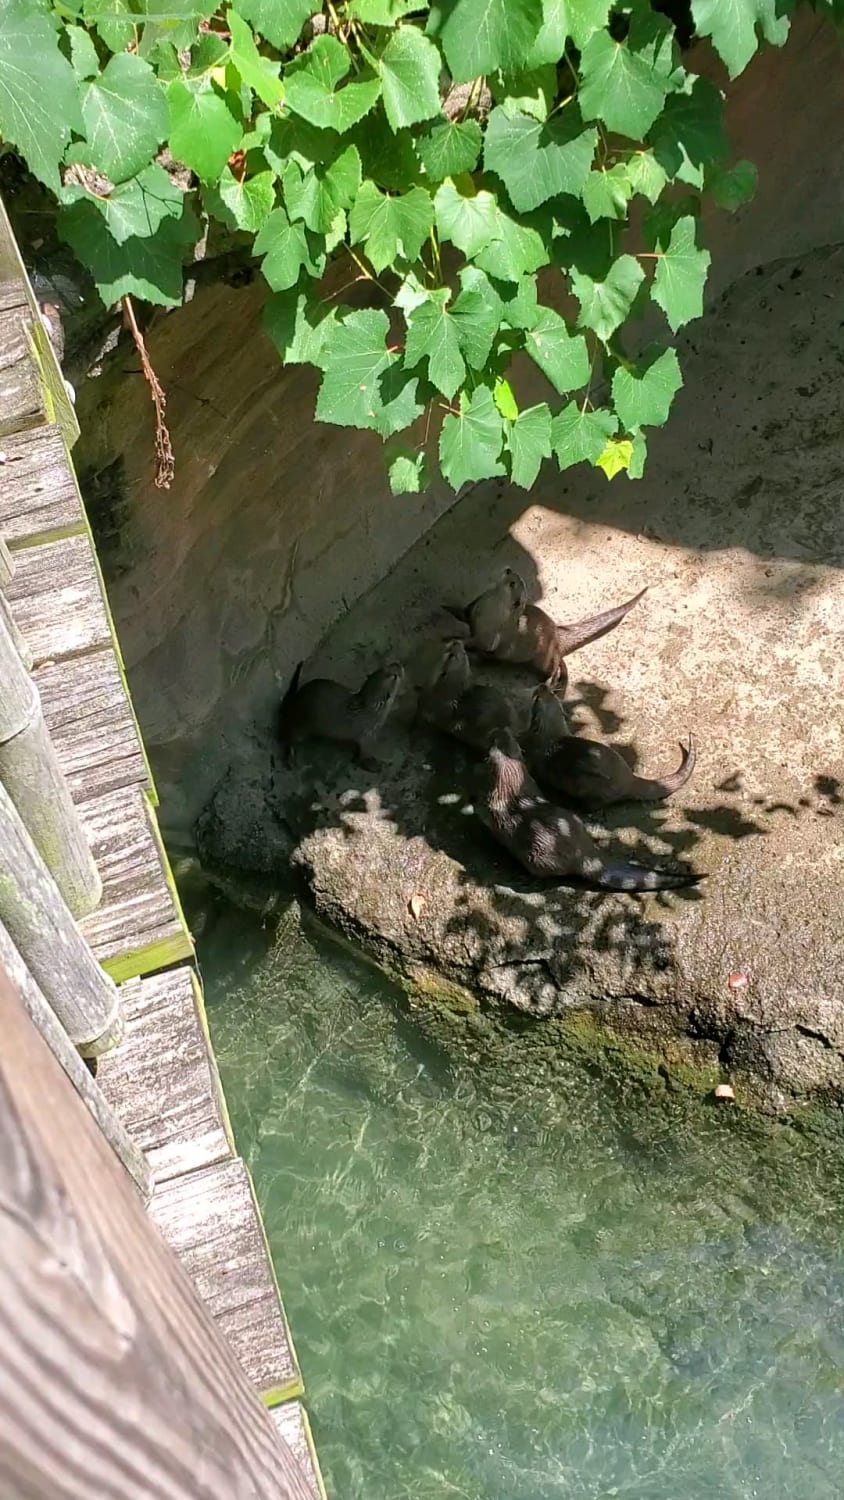 Otters and a butterfly at the Columbus zoo 😍